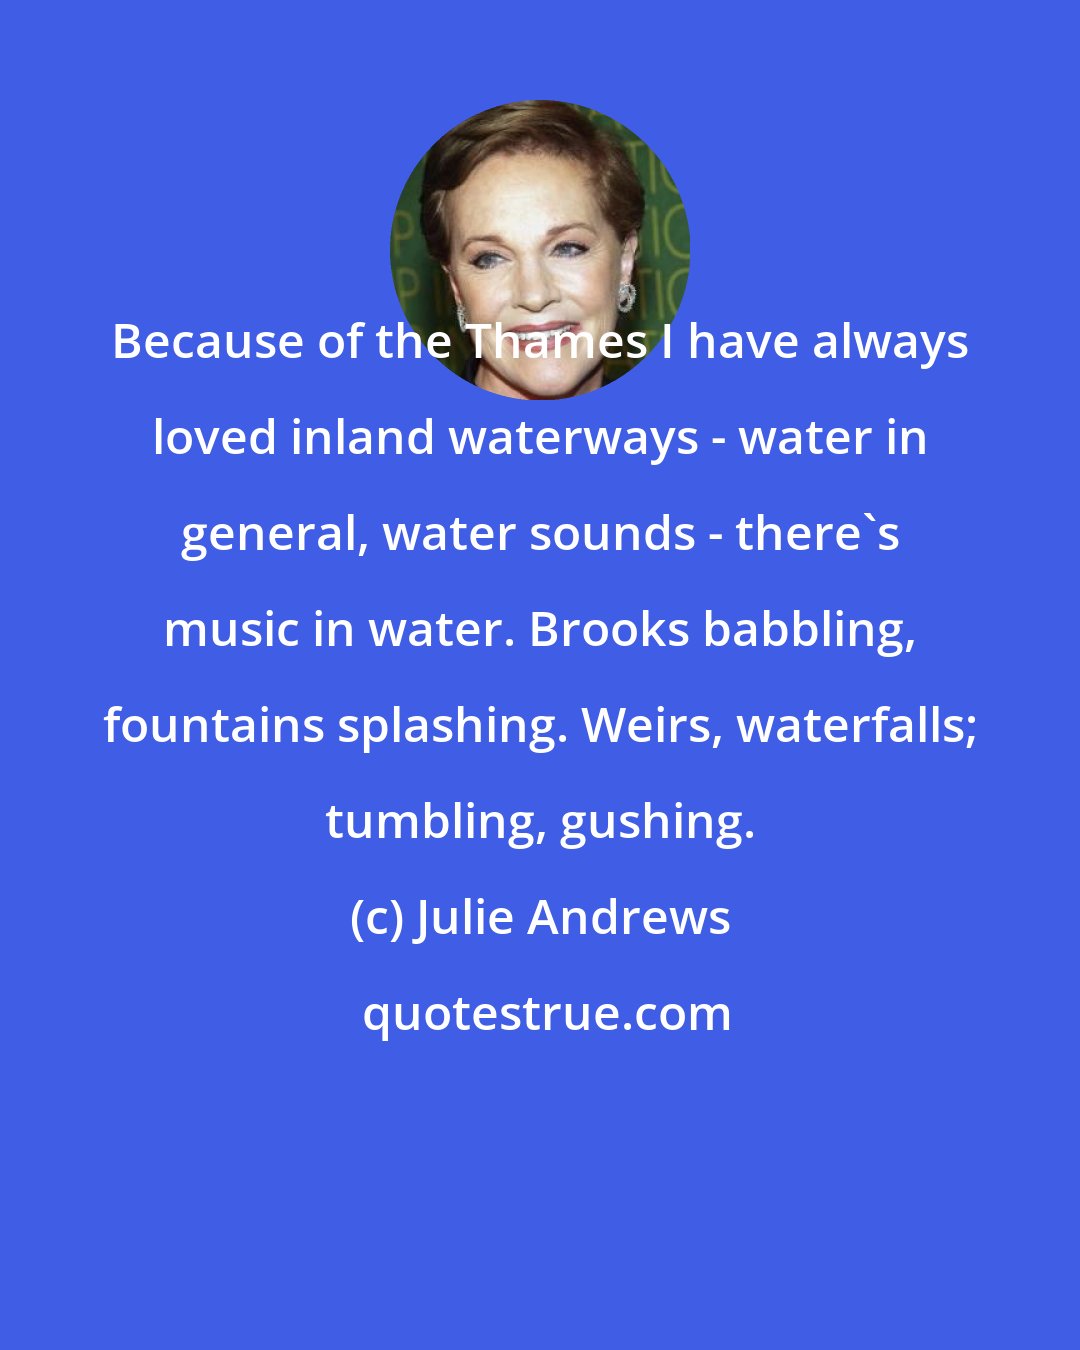 Julie Andrews: Because of the Thames I have always loved inland waterways - water in general, water sounds - there's music in water. Brooks babbling, fountains splashing. Weirs, waterfalls; tumbling, gushing.